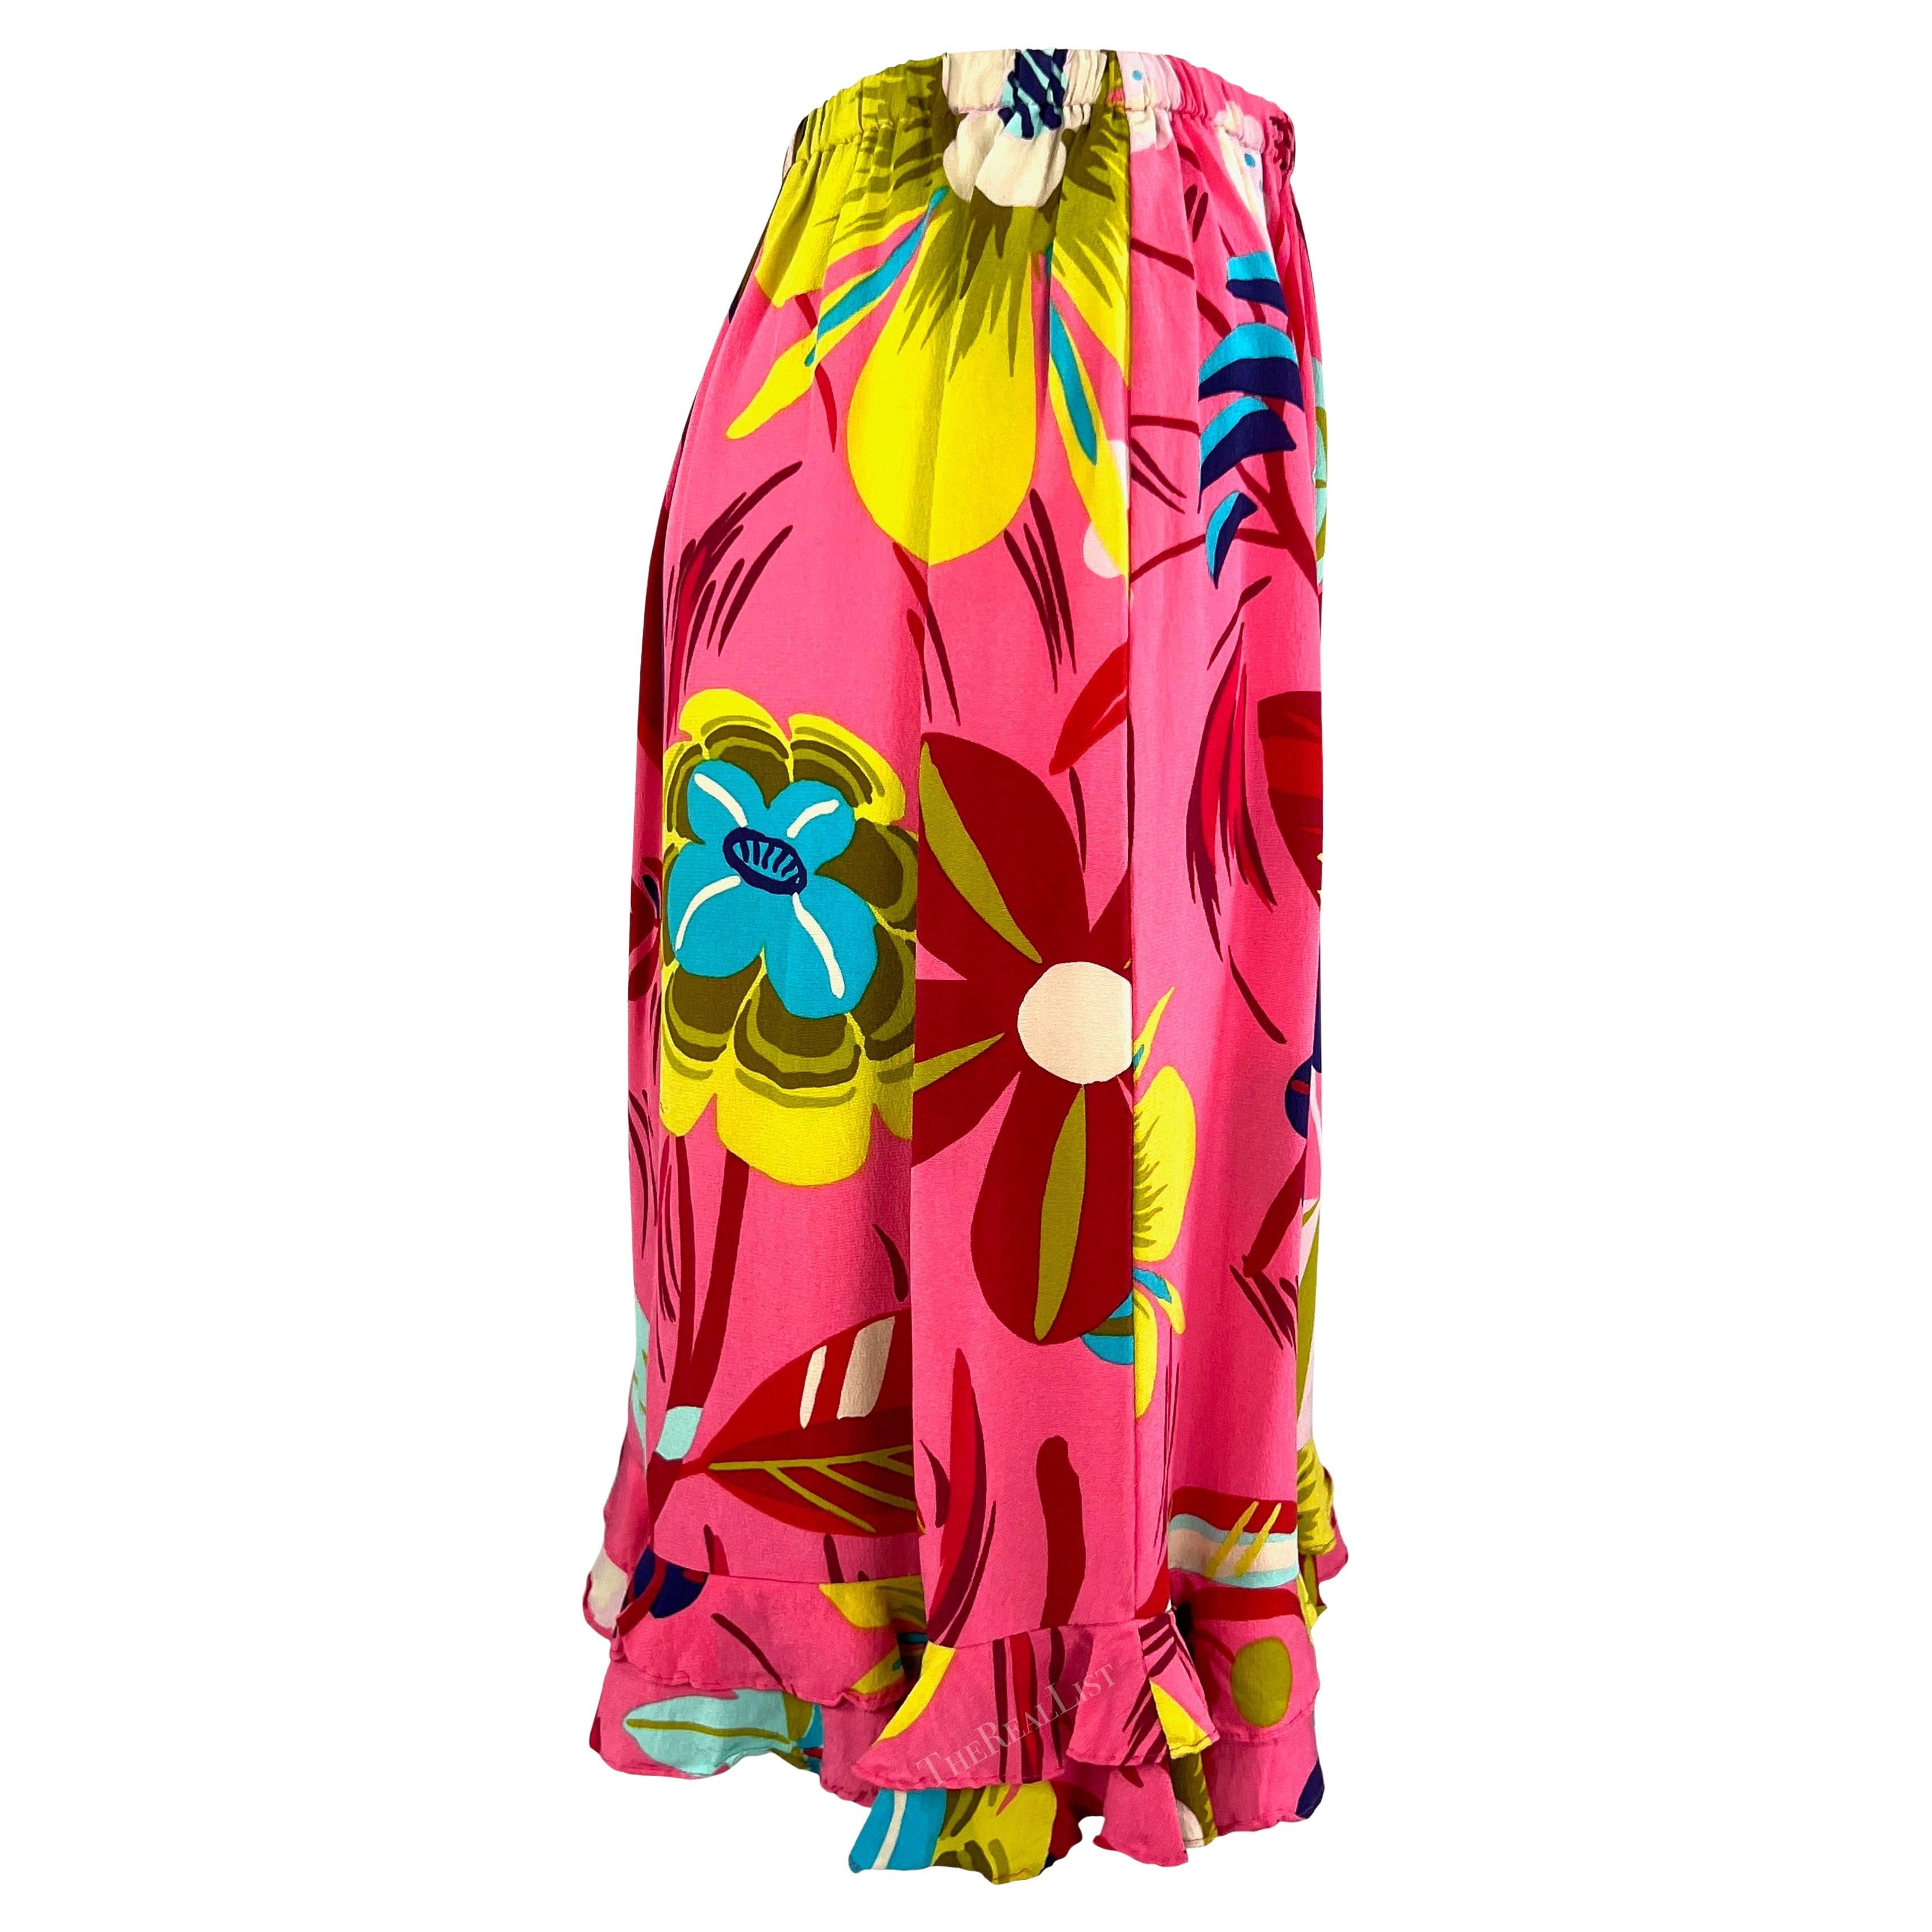 S/S 1999 Gucci by Tom Ford Vegas Hippy Runway Pink Silk Acid Floral Ruffle Skirt For Sale 3